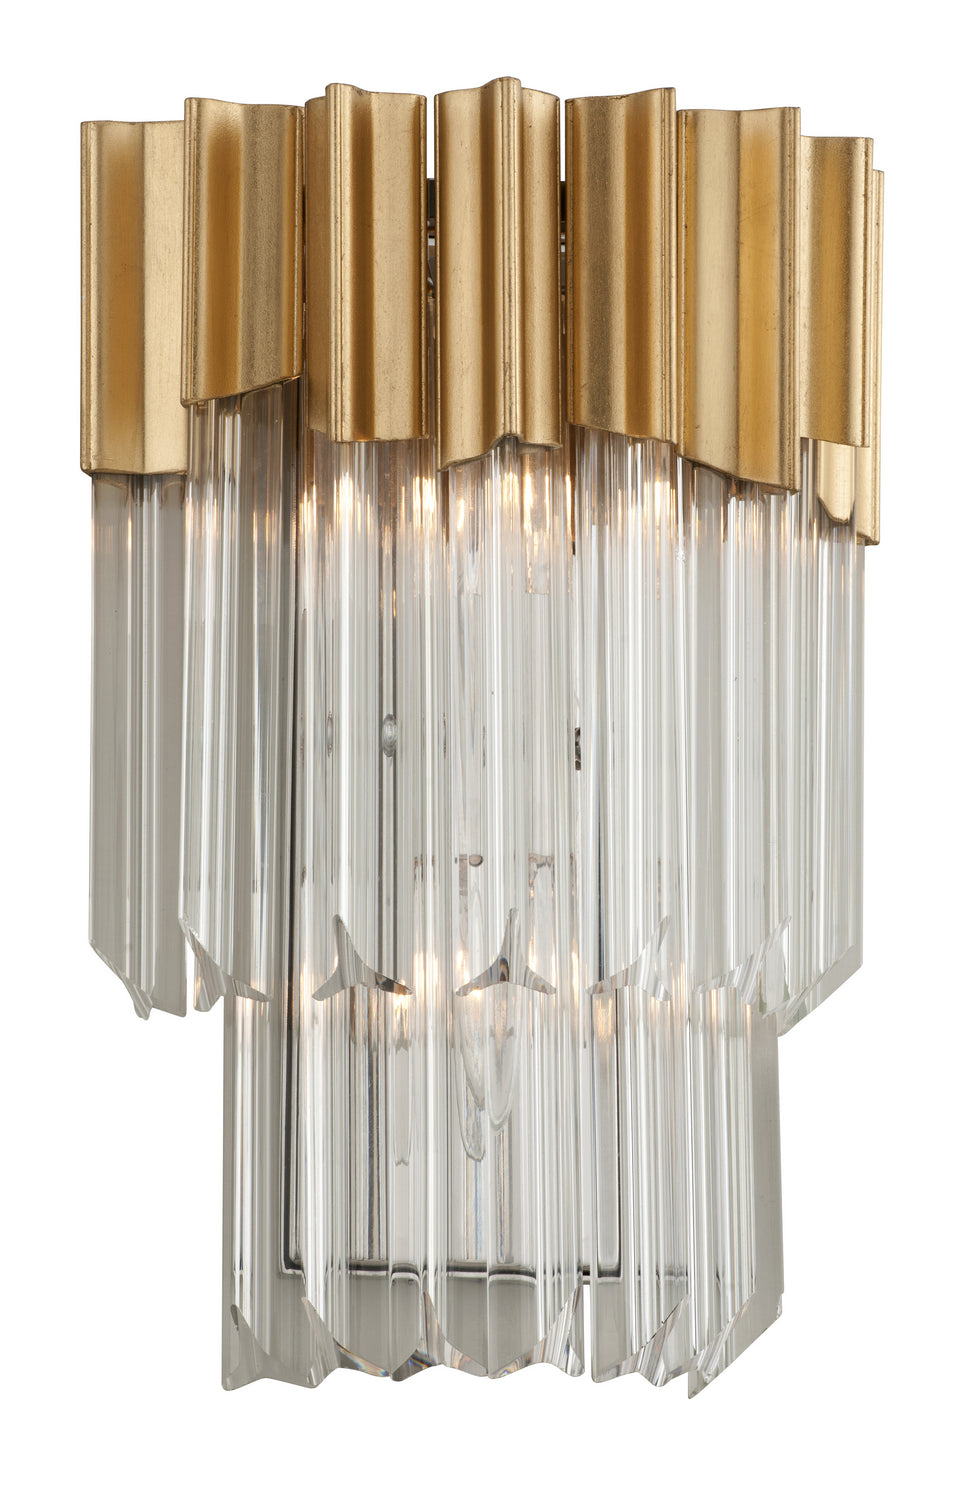 Corbett Lighting - Two Light Wall Sconce - Charisma - Gold Leaf W Polished Stainless- Union Lighting Luminaires Decor